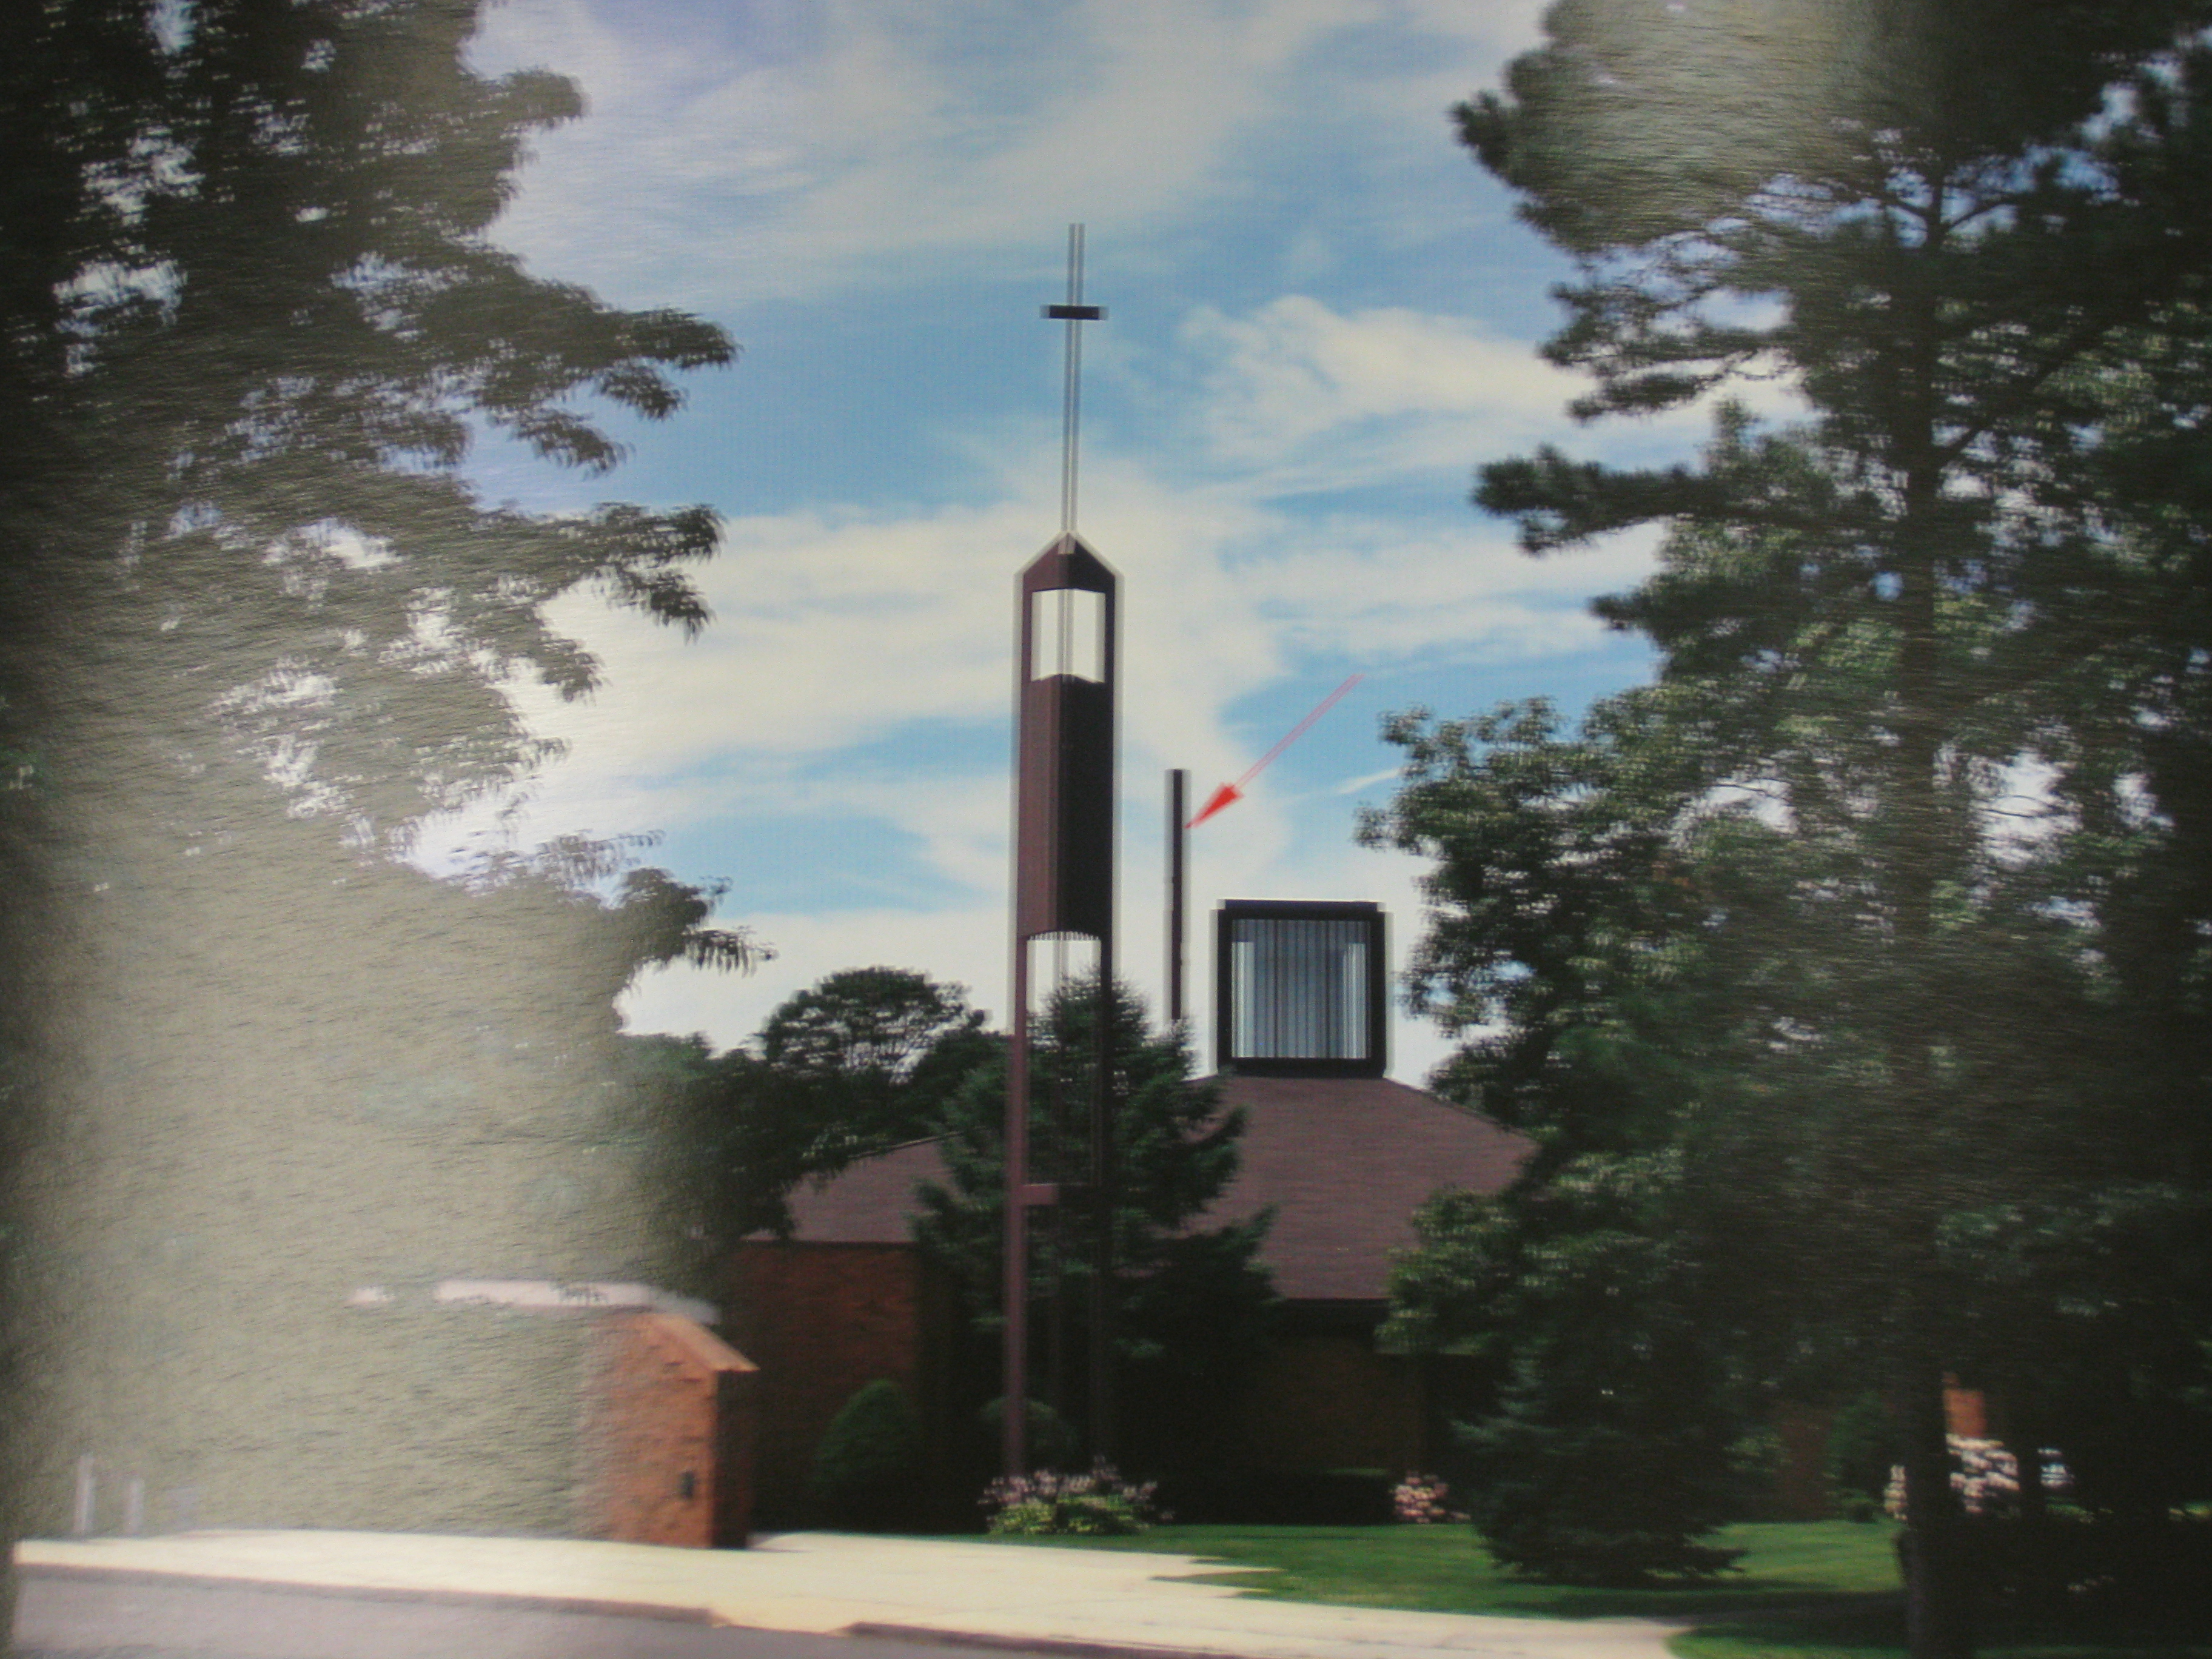 Proposed monopole at Church of the Good Shepherd Holbrook